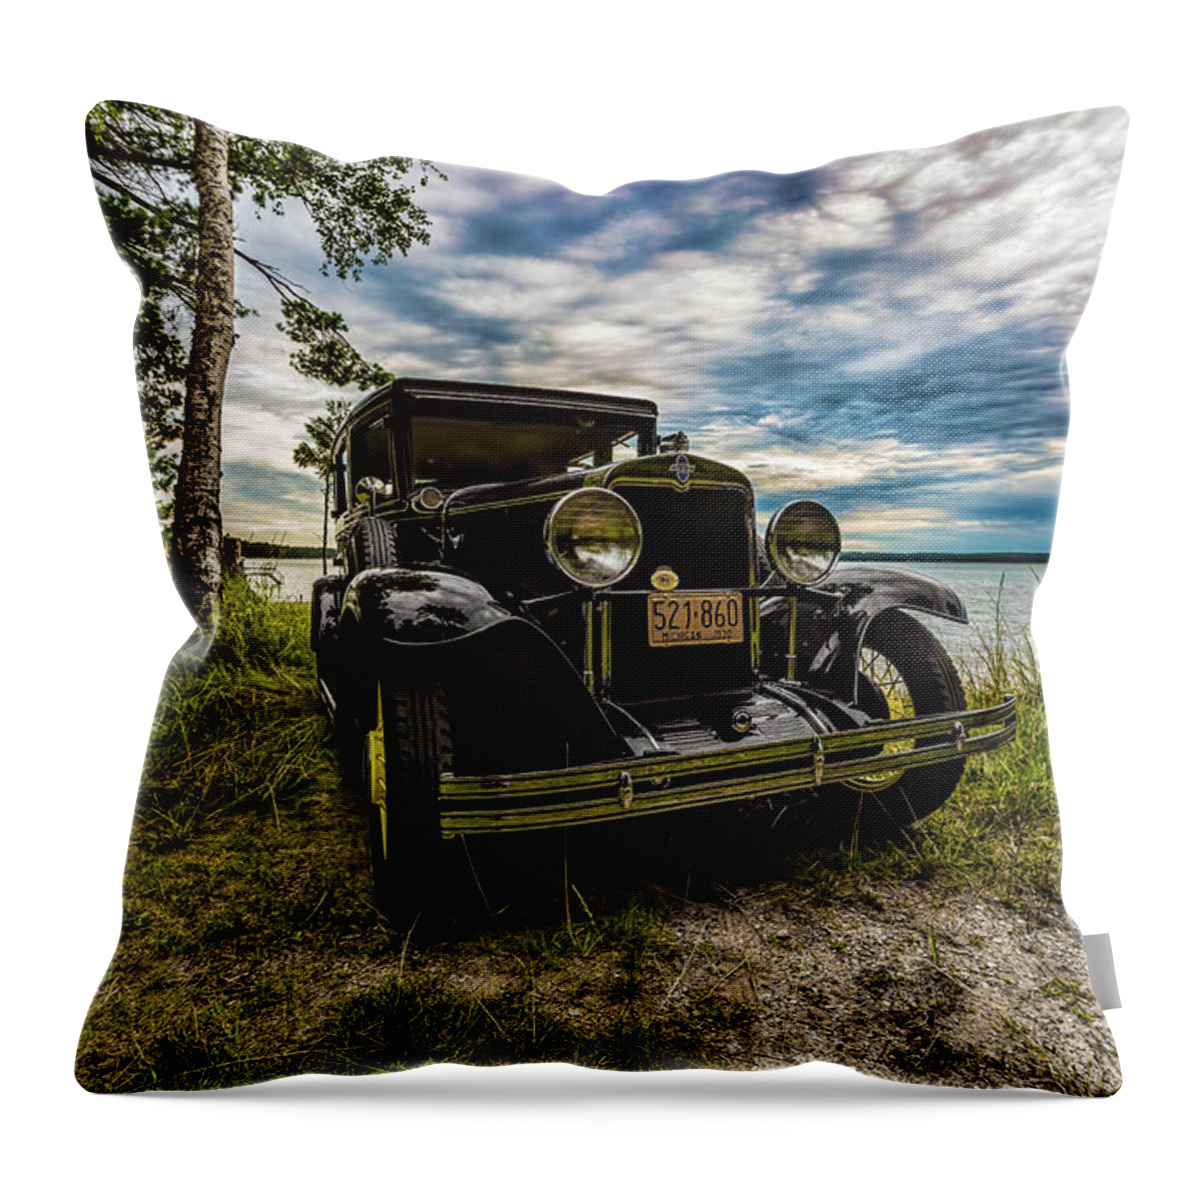 Higgins Lake Throw Pillow featuring the photograph 1930 Chevy on the shore of Higgins Lake by Joe Holley